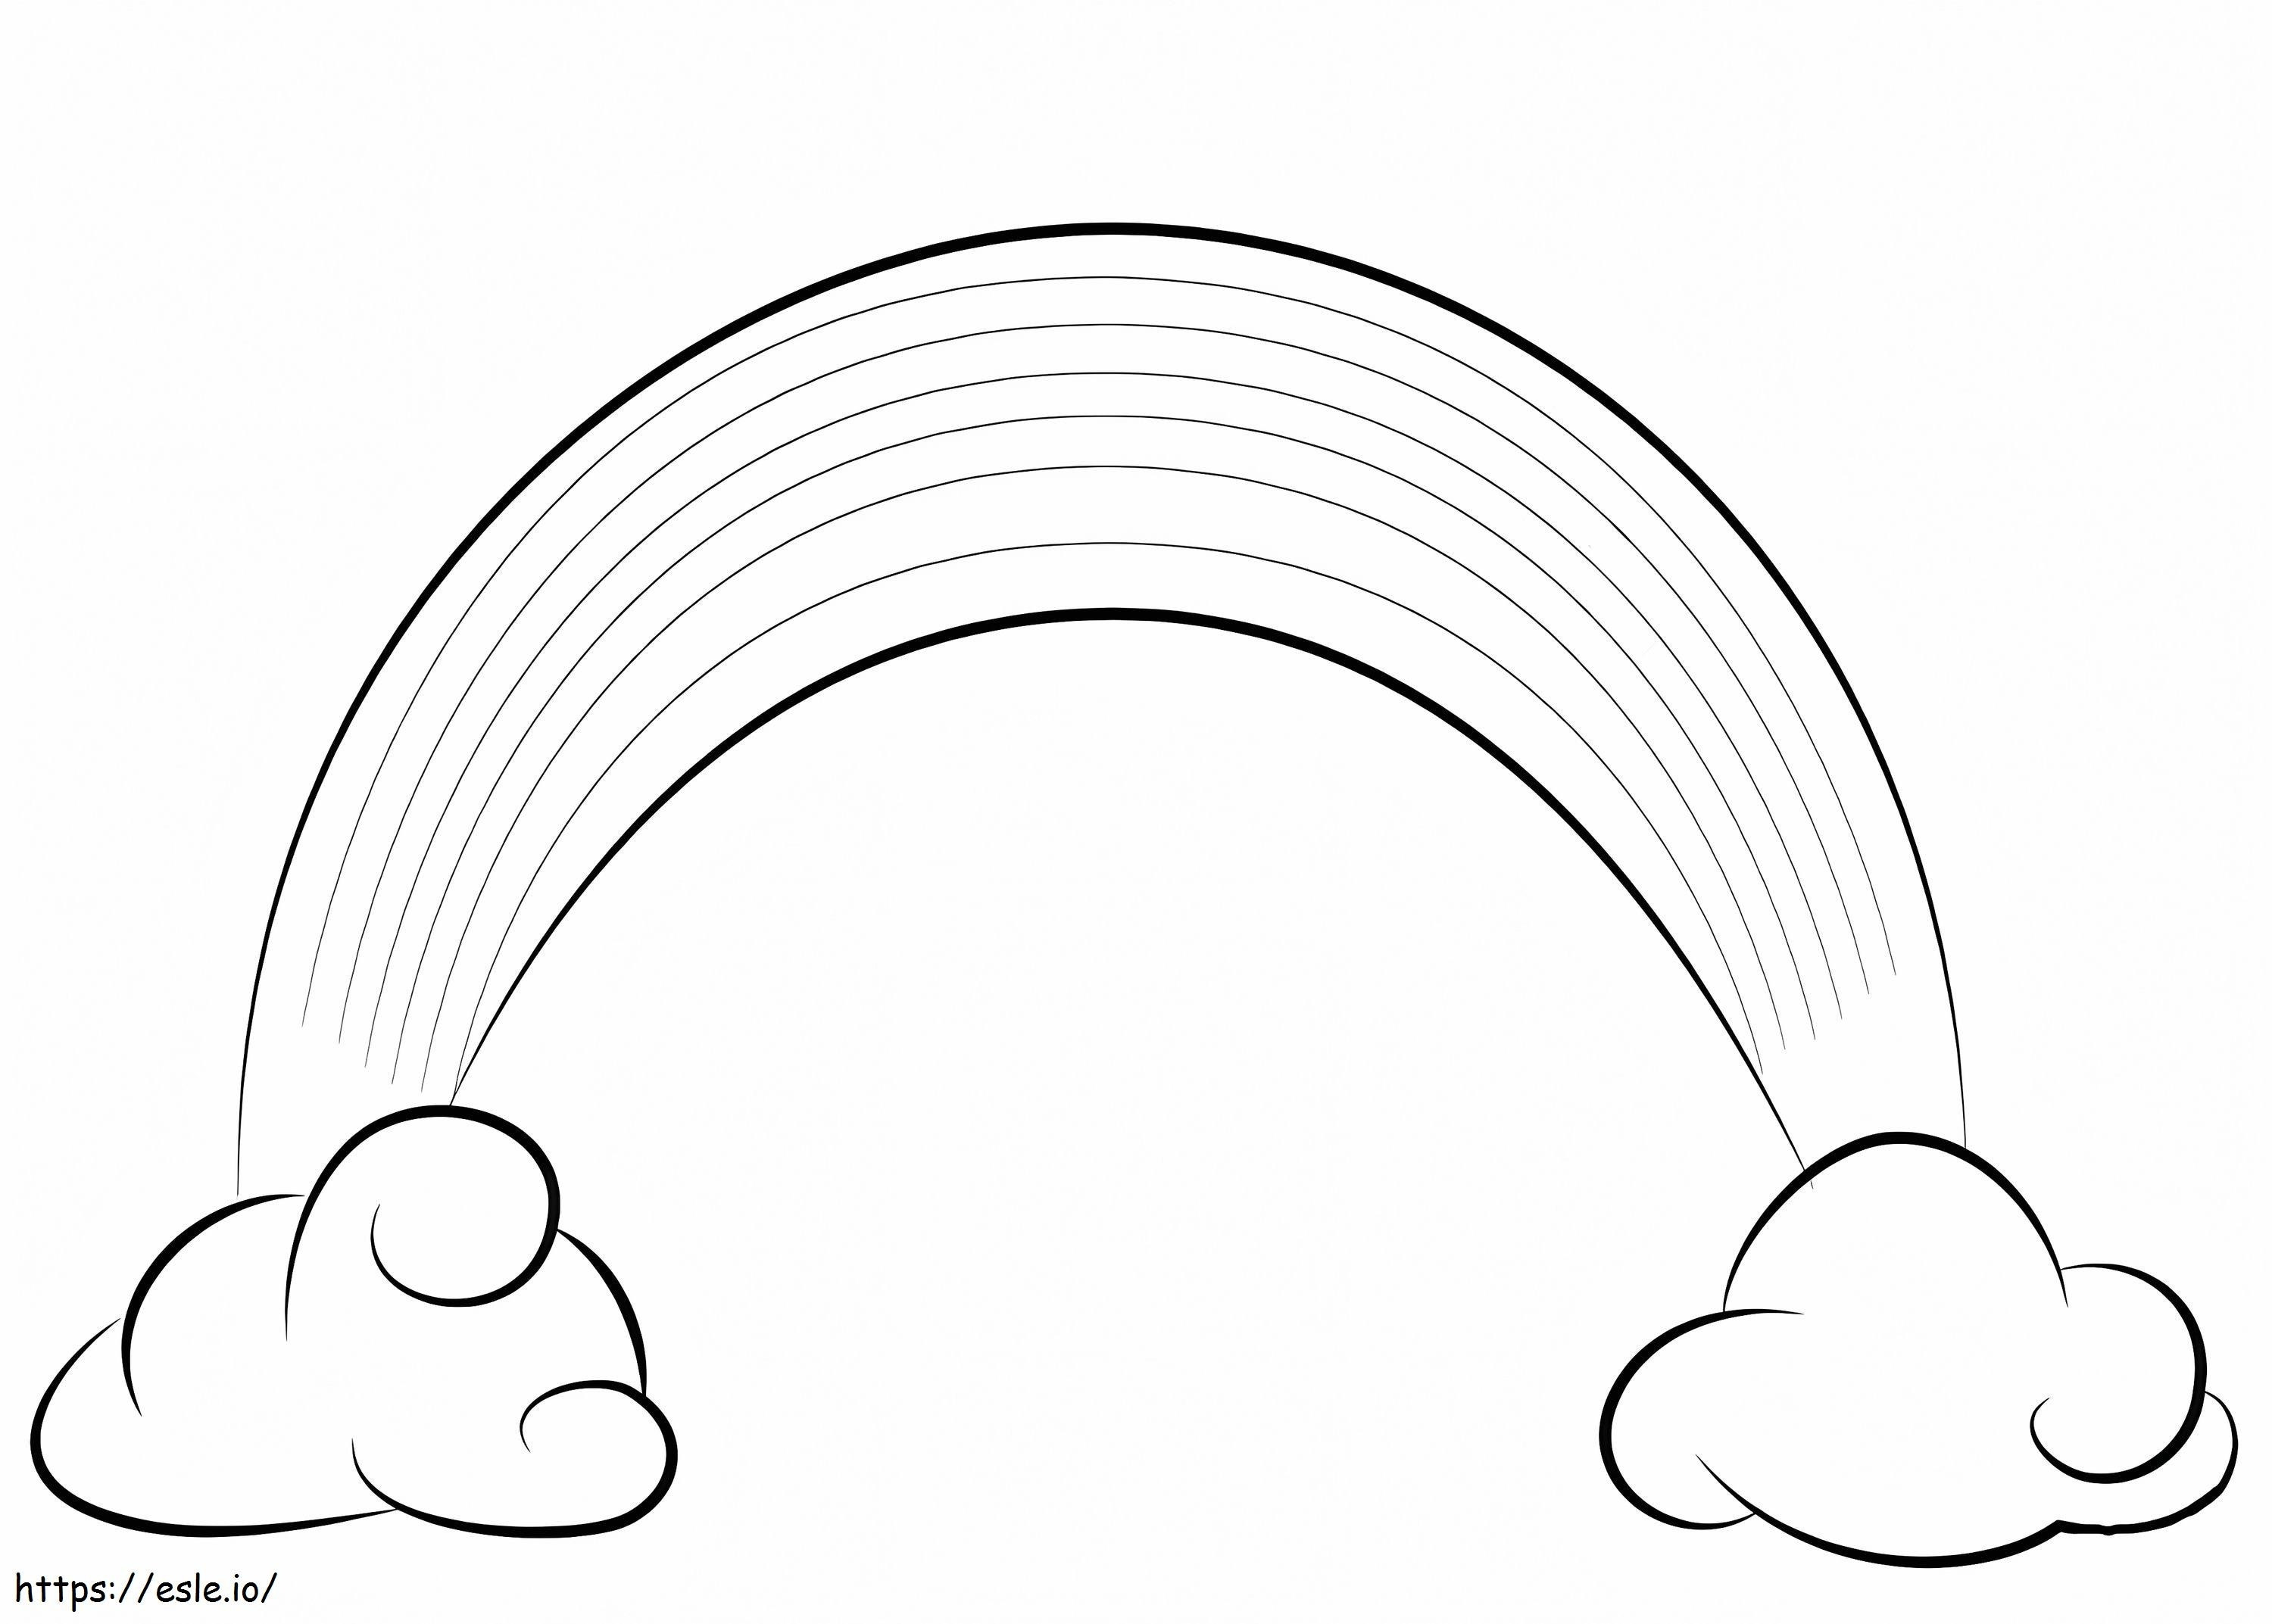 Easy Rainbow And Clouds coloring page